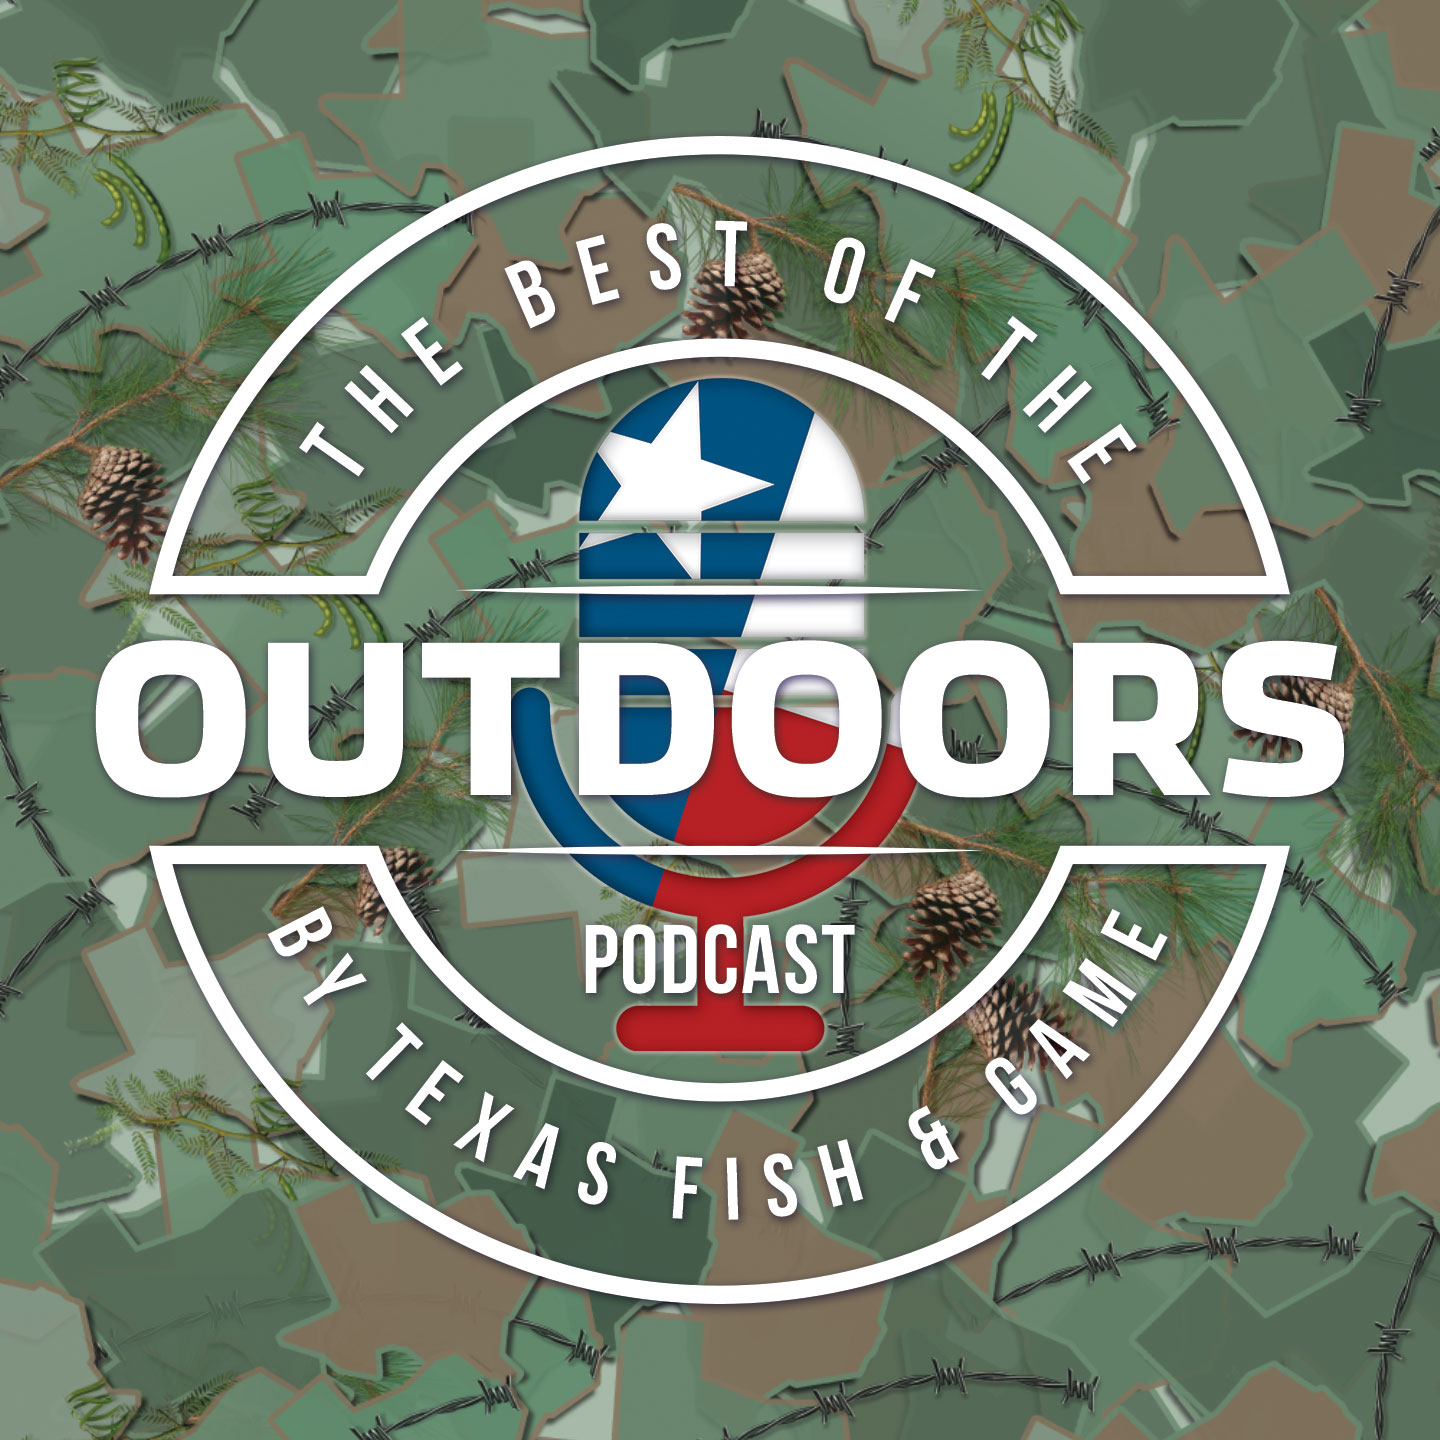 Live at the NRA Show in Dallas, Dustin’s Turkey Hunt, the 2nd Amendment and More with Host Dustin Warncke